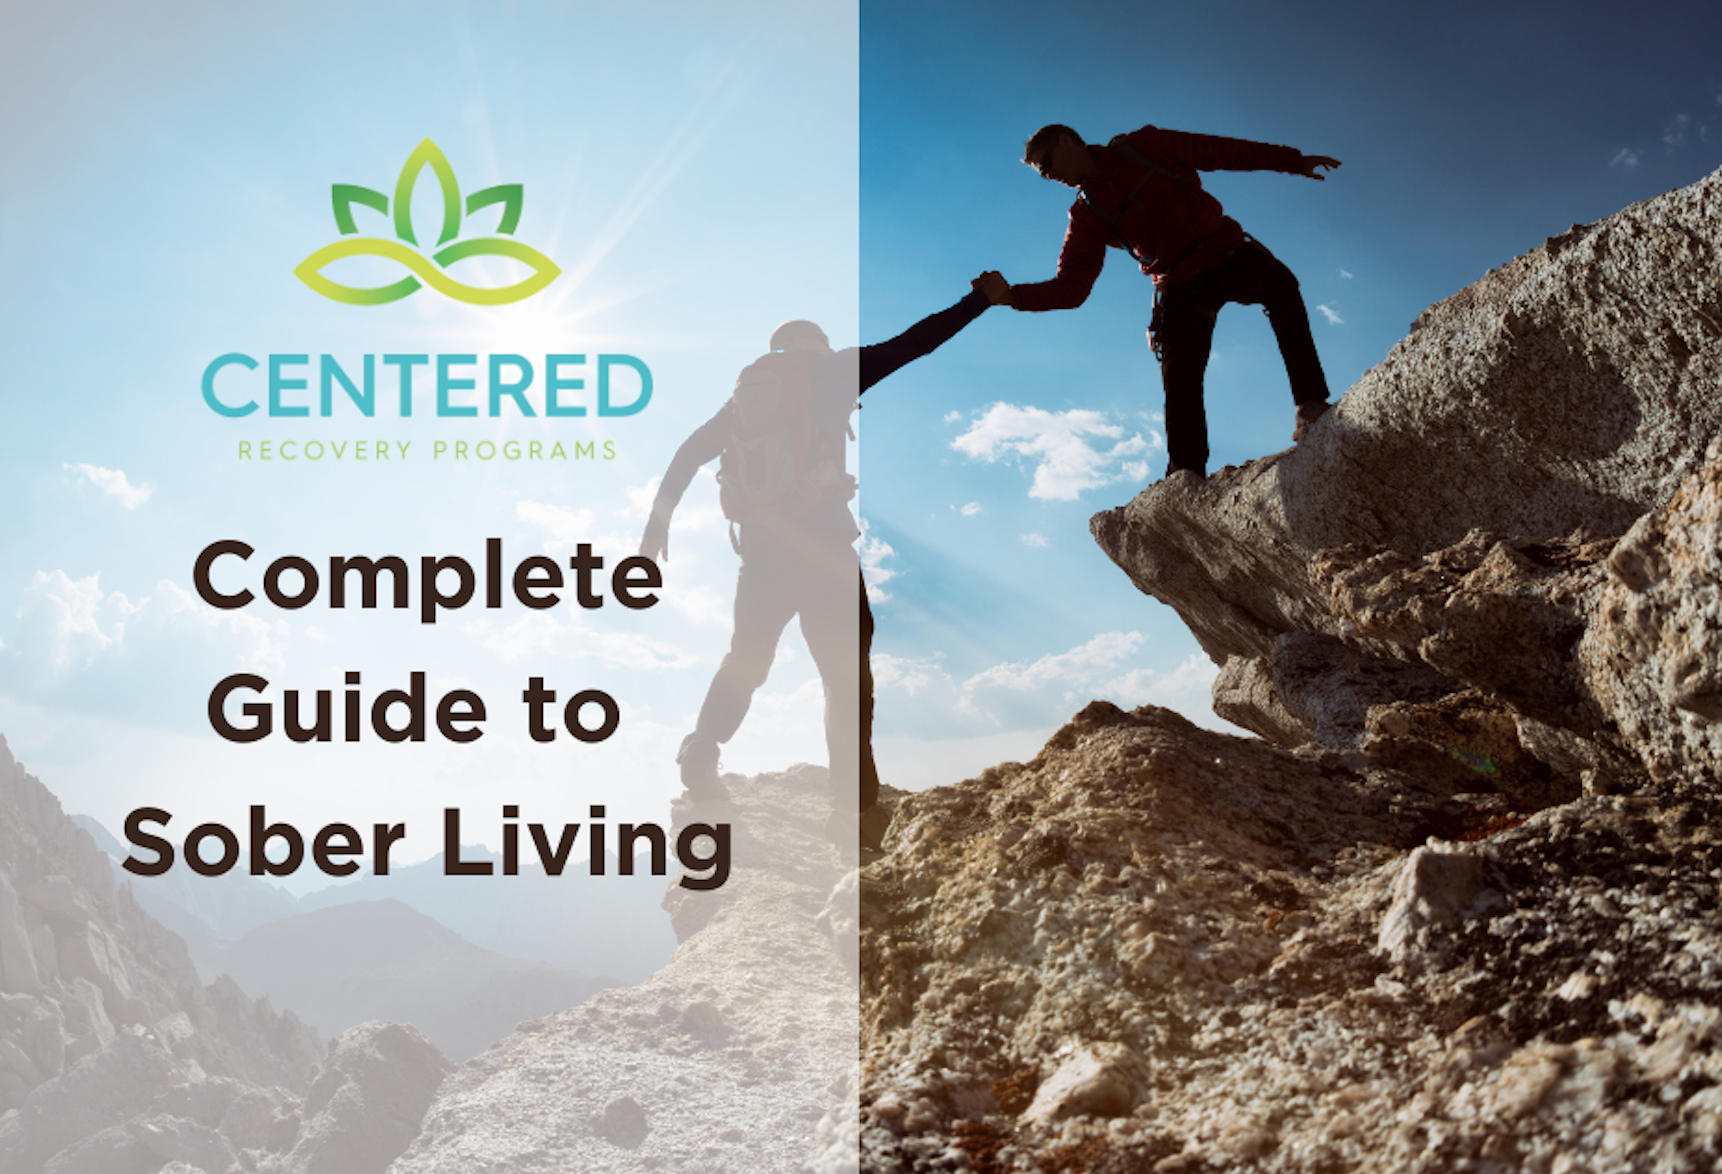 The Complete Guide To Sober Living